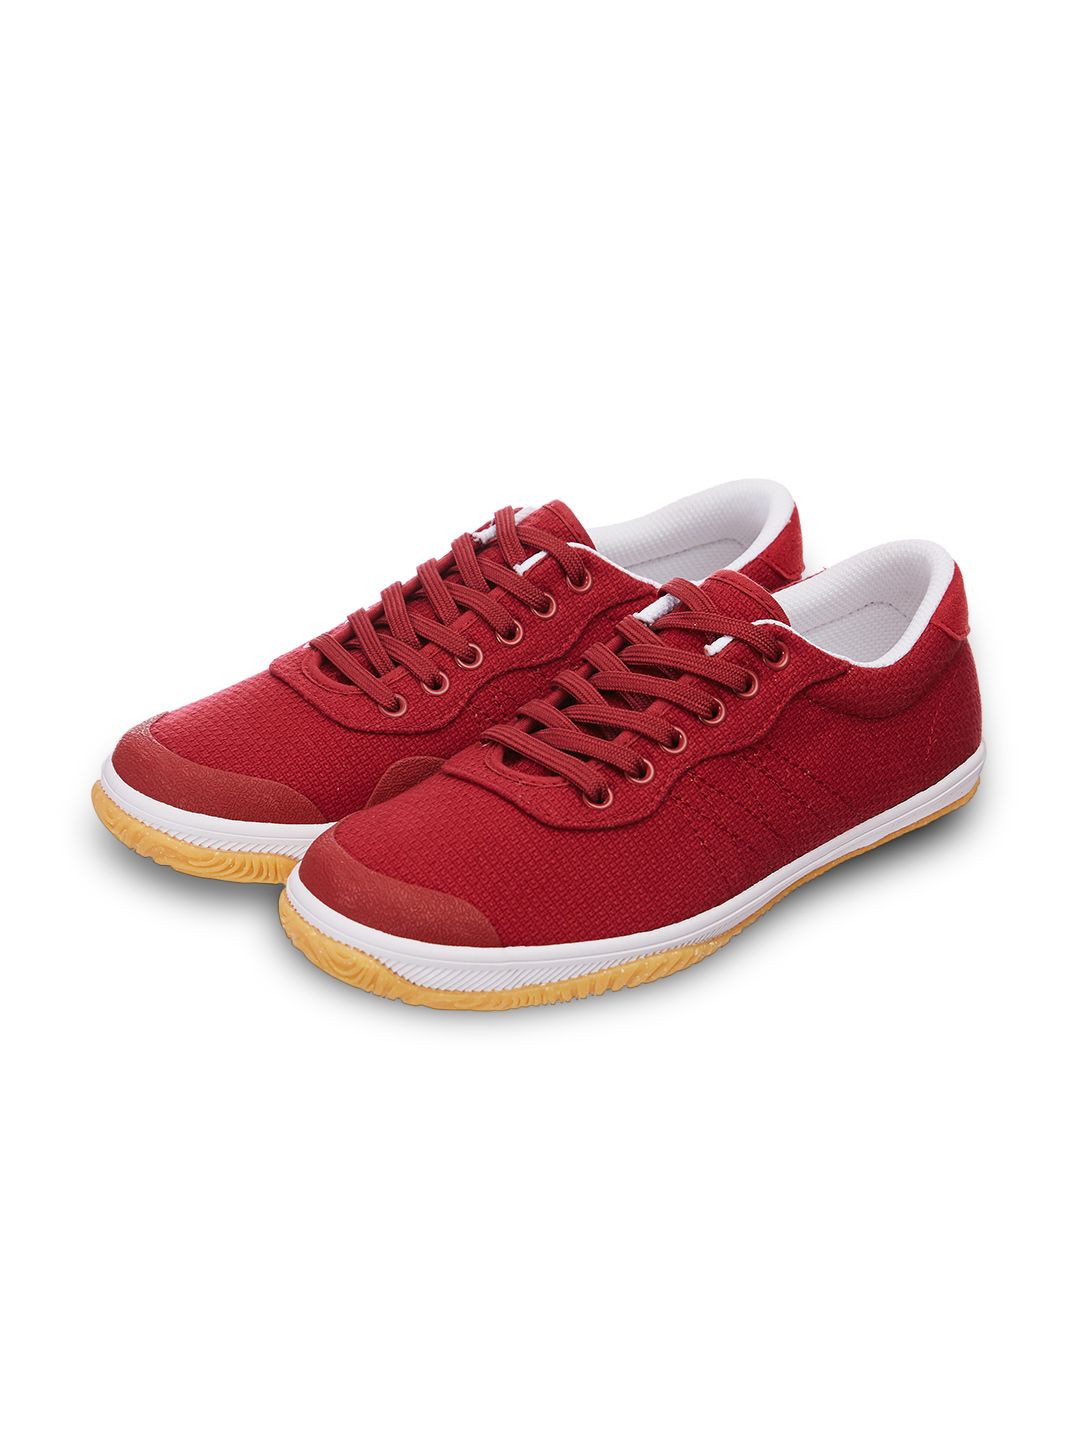 PERFLY By Decathlon Women Maroon Badminton Shoes Price in India